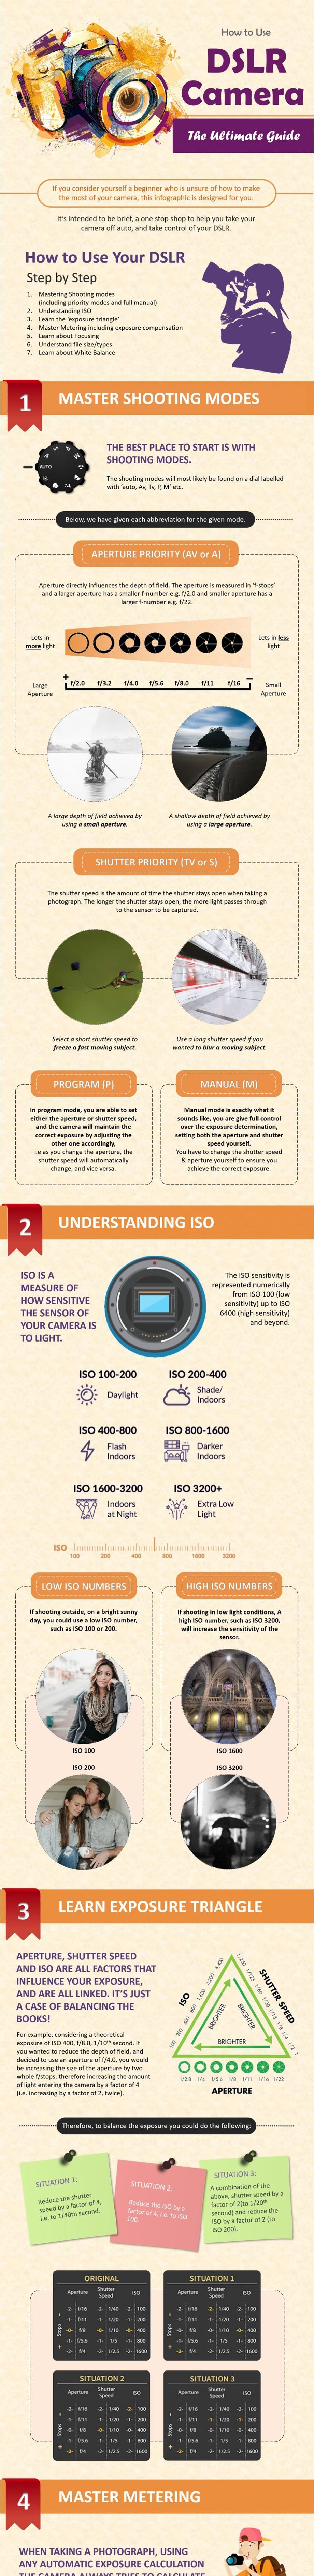 How to Use a DSLR Camera - The Ultimate Guide (Infographic) - 1